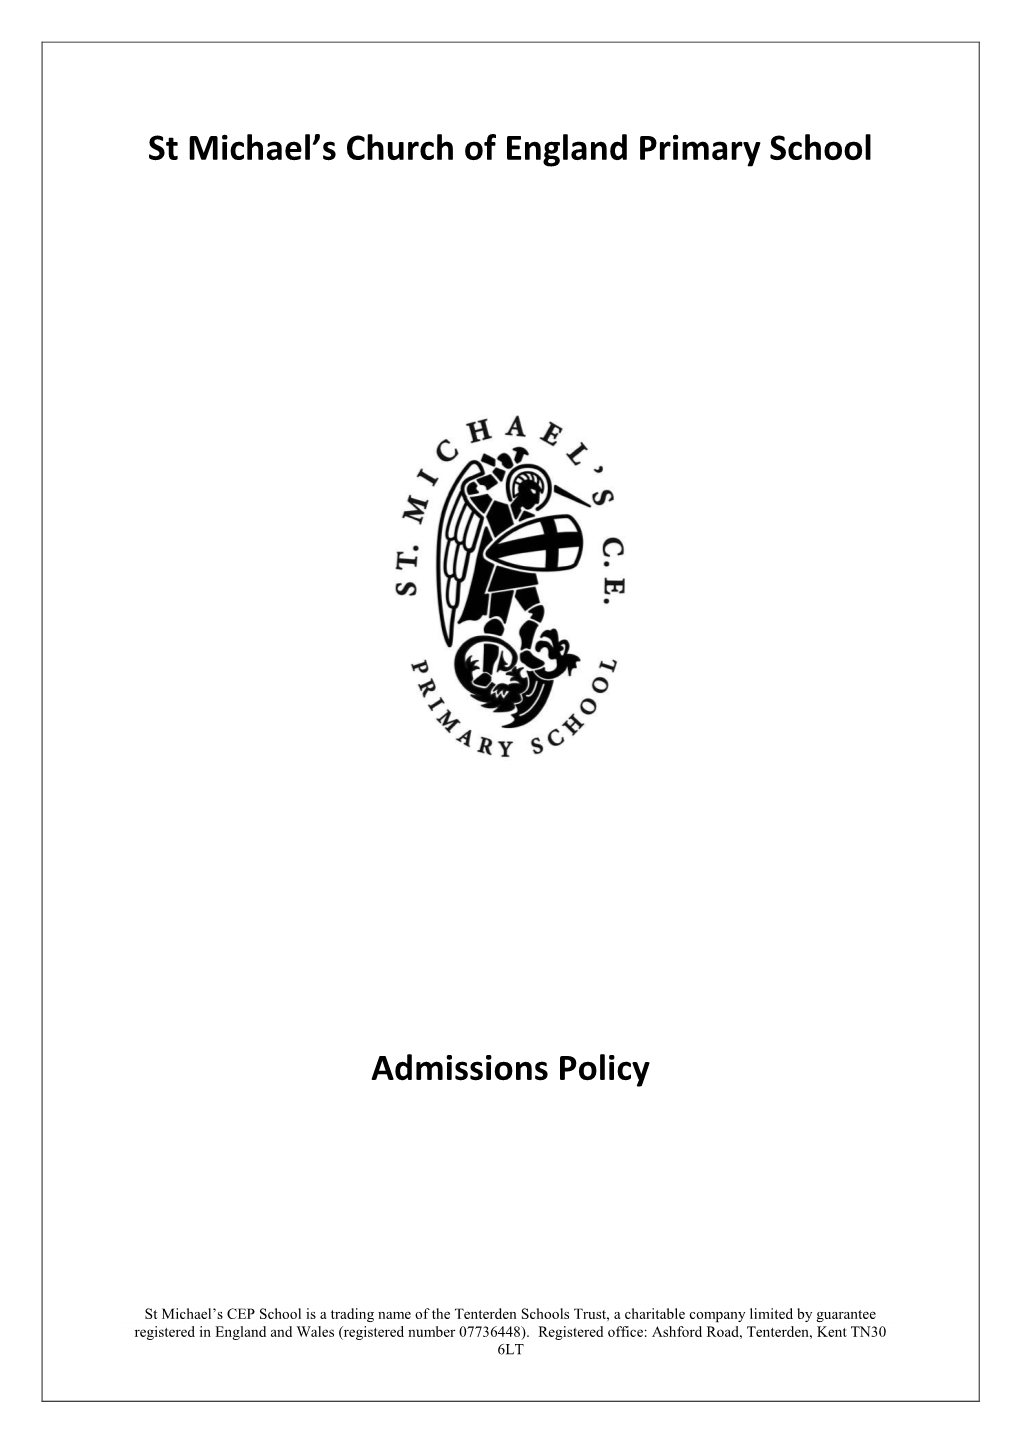 St Michael's Church of England Primary School Admissions Policy